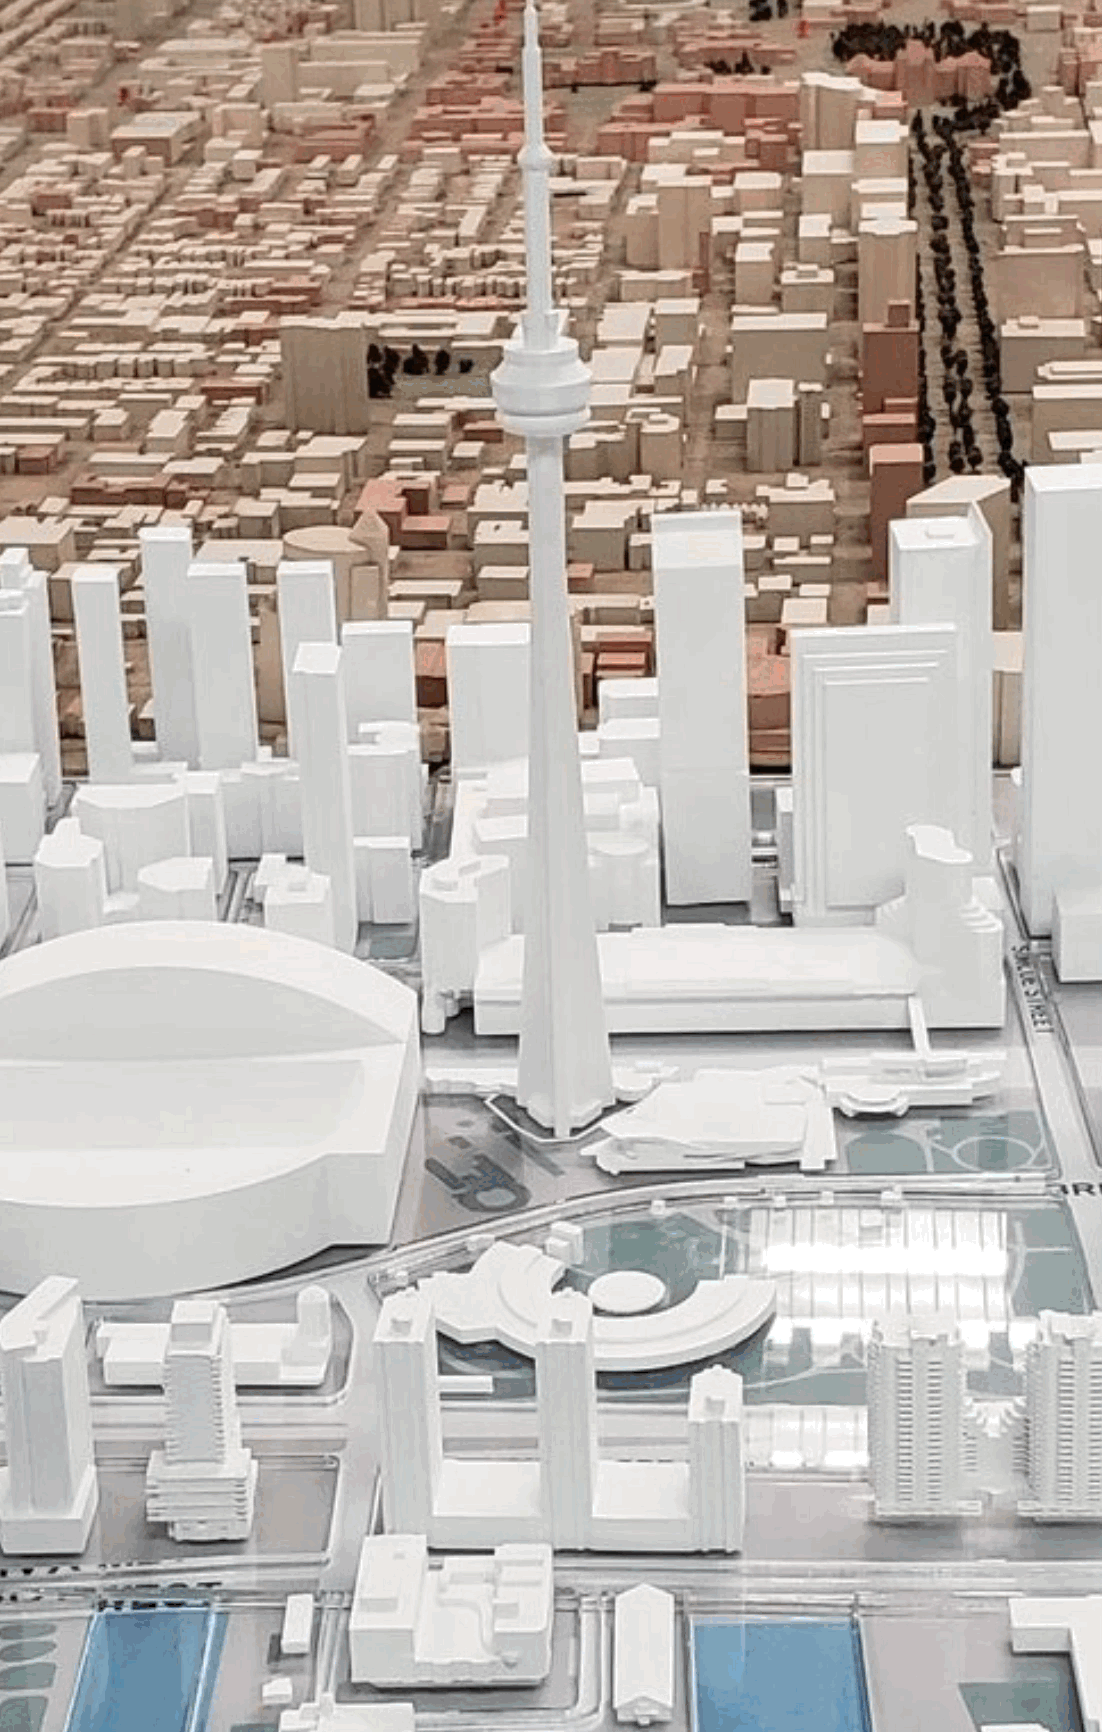 a scale model of a city